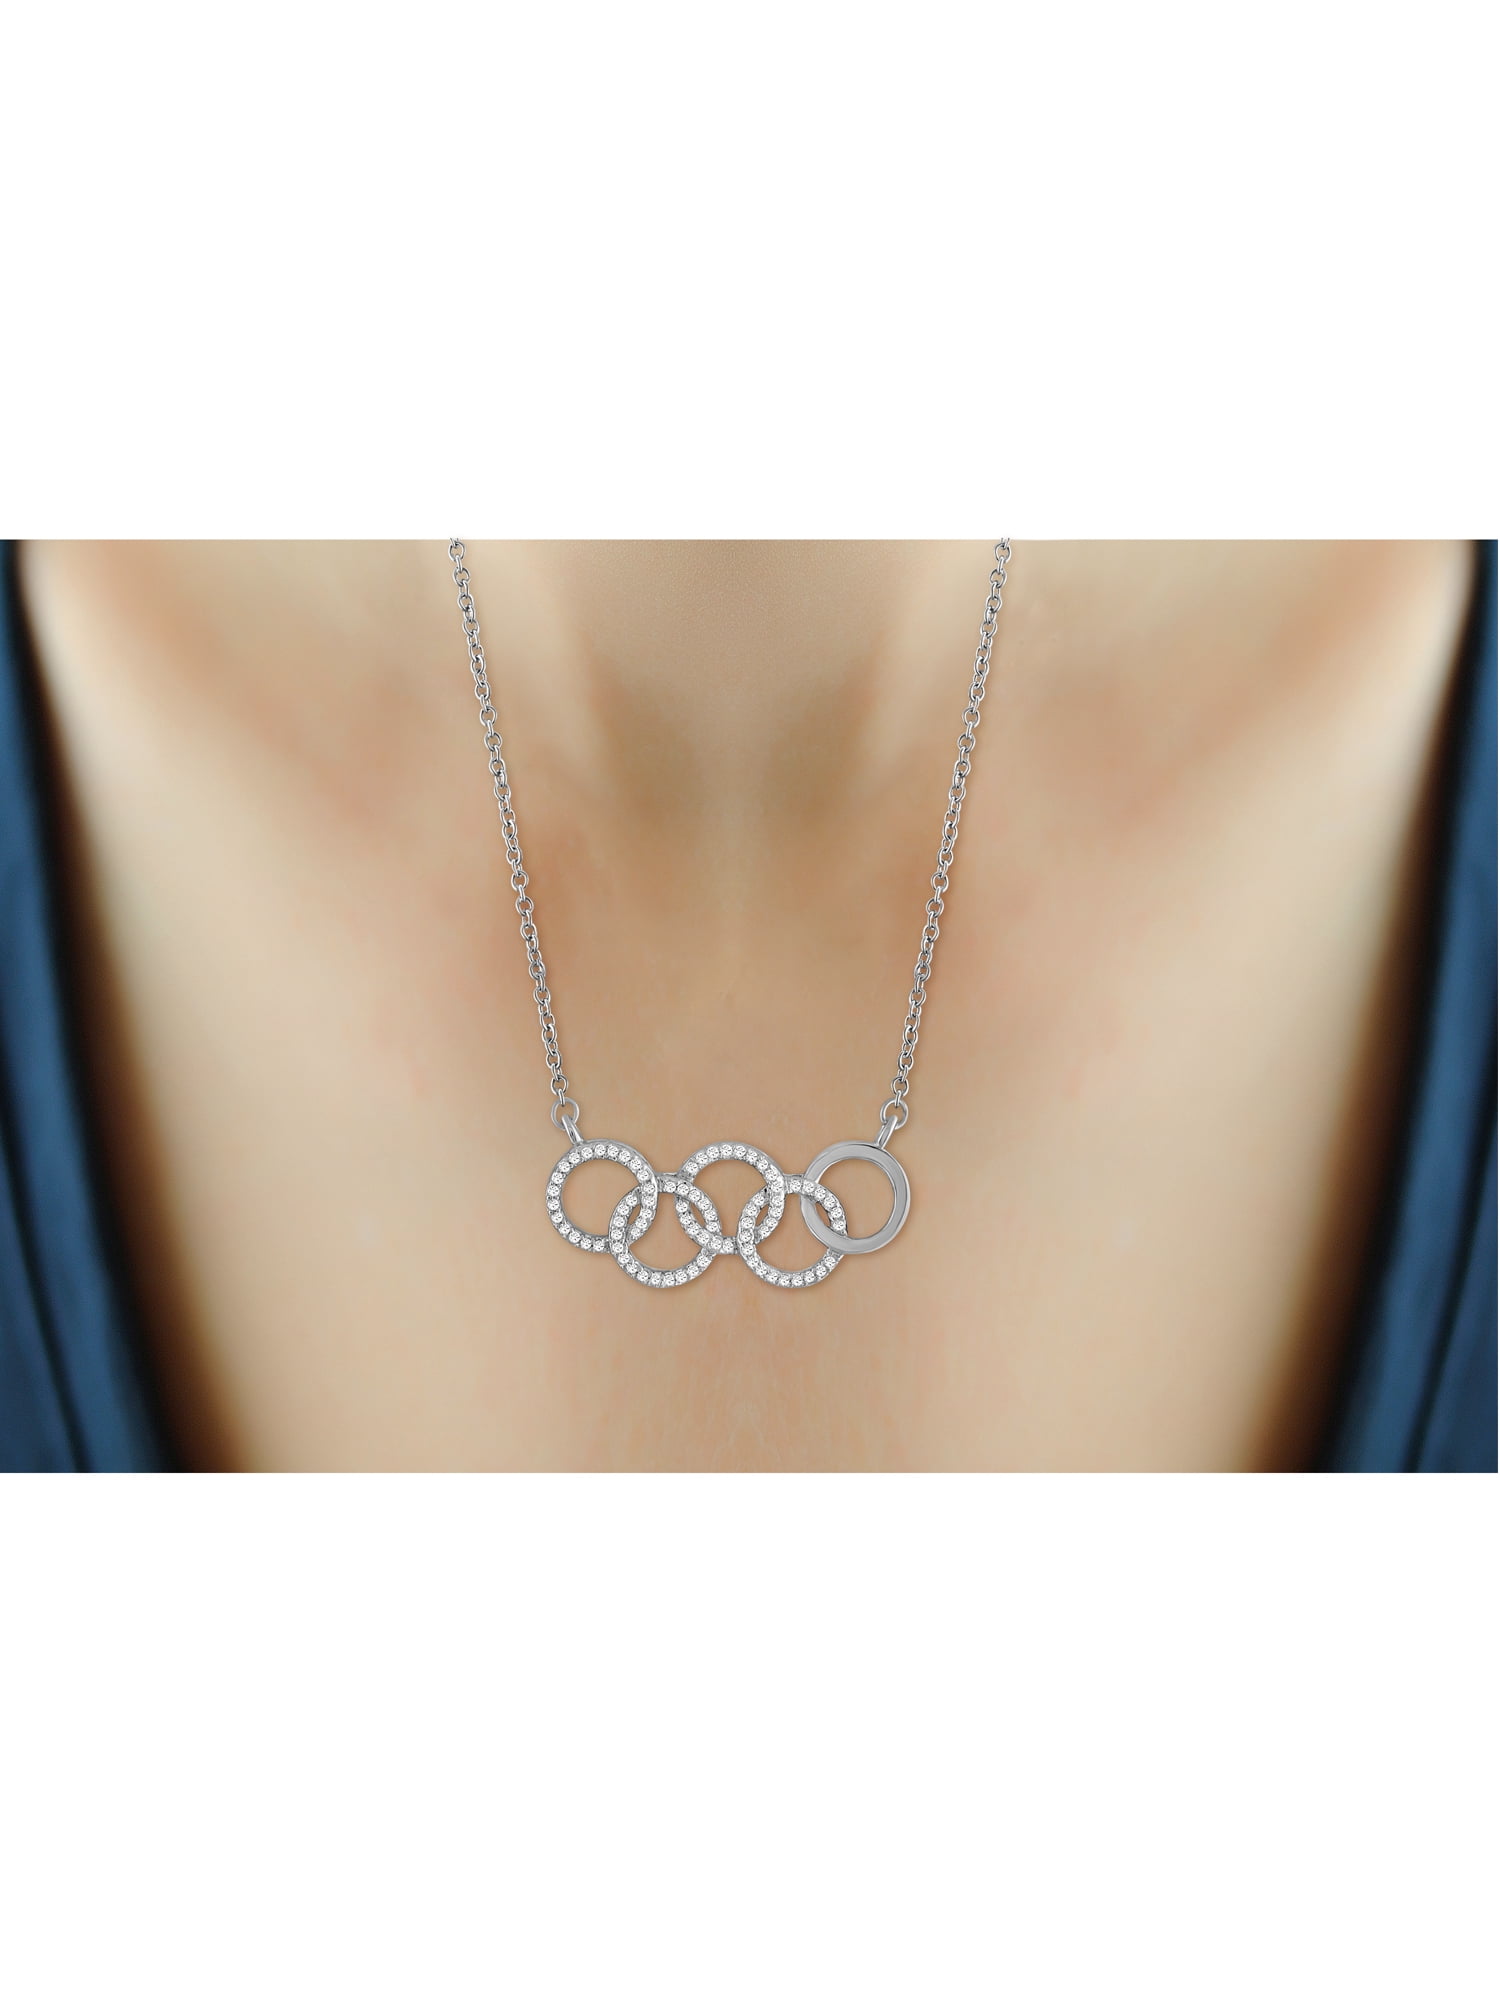 Mom Russian Ring Necklace | Silver | The Silver Wing